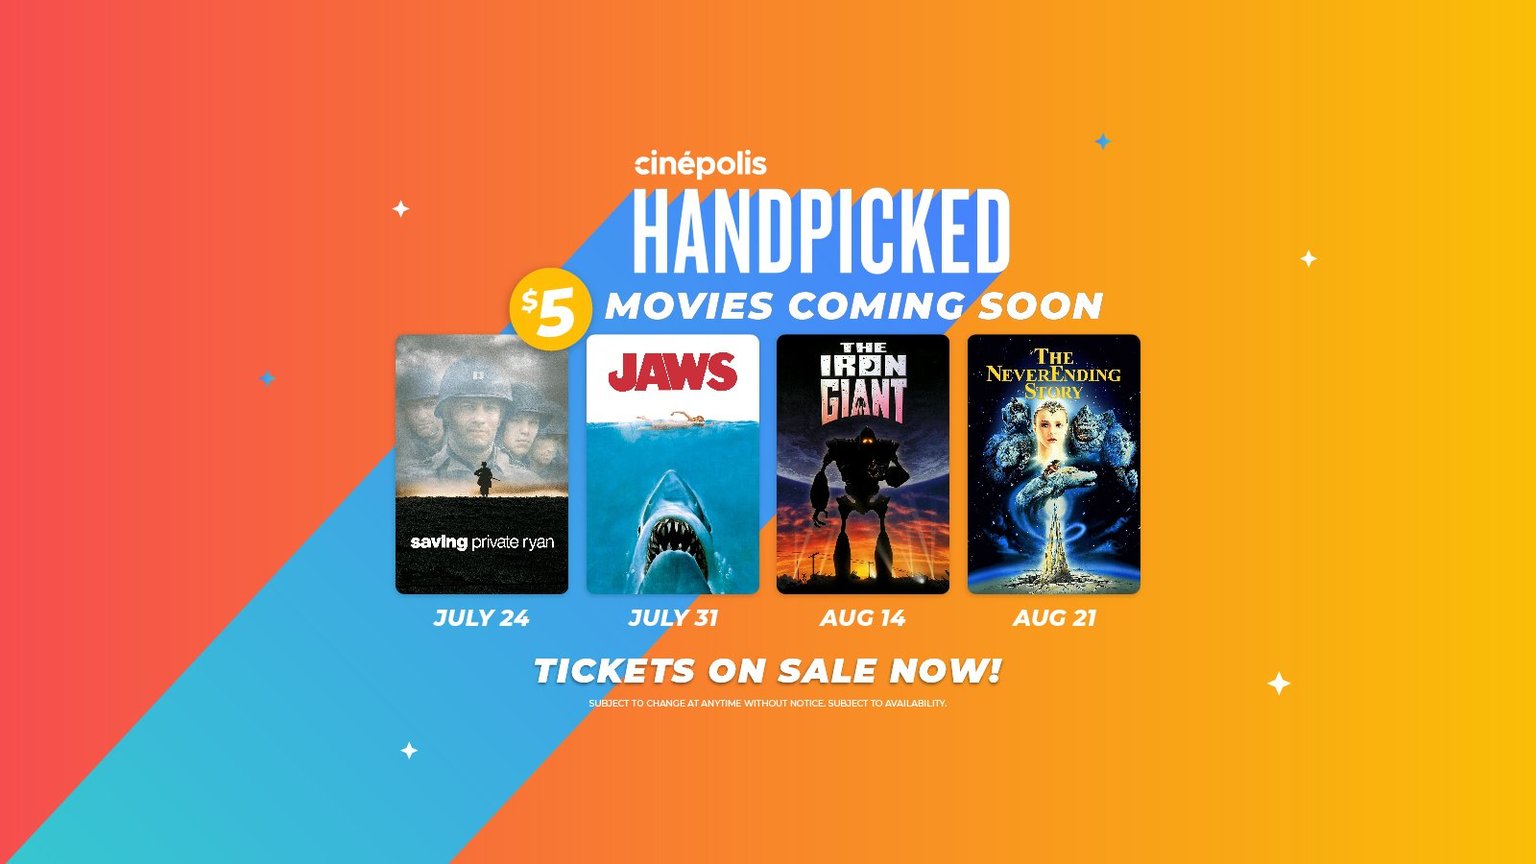 Handpicked Classics for $5 at Cinepolis